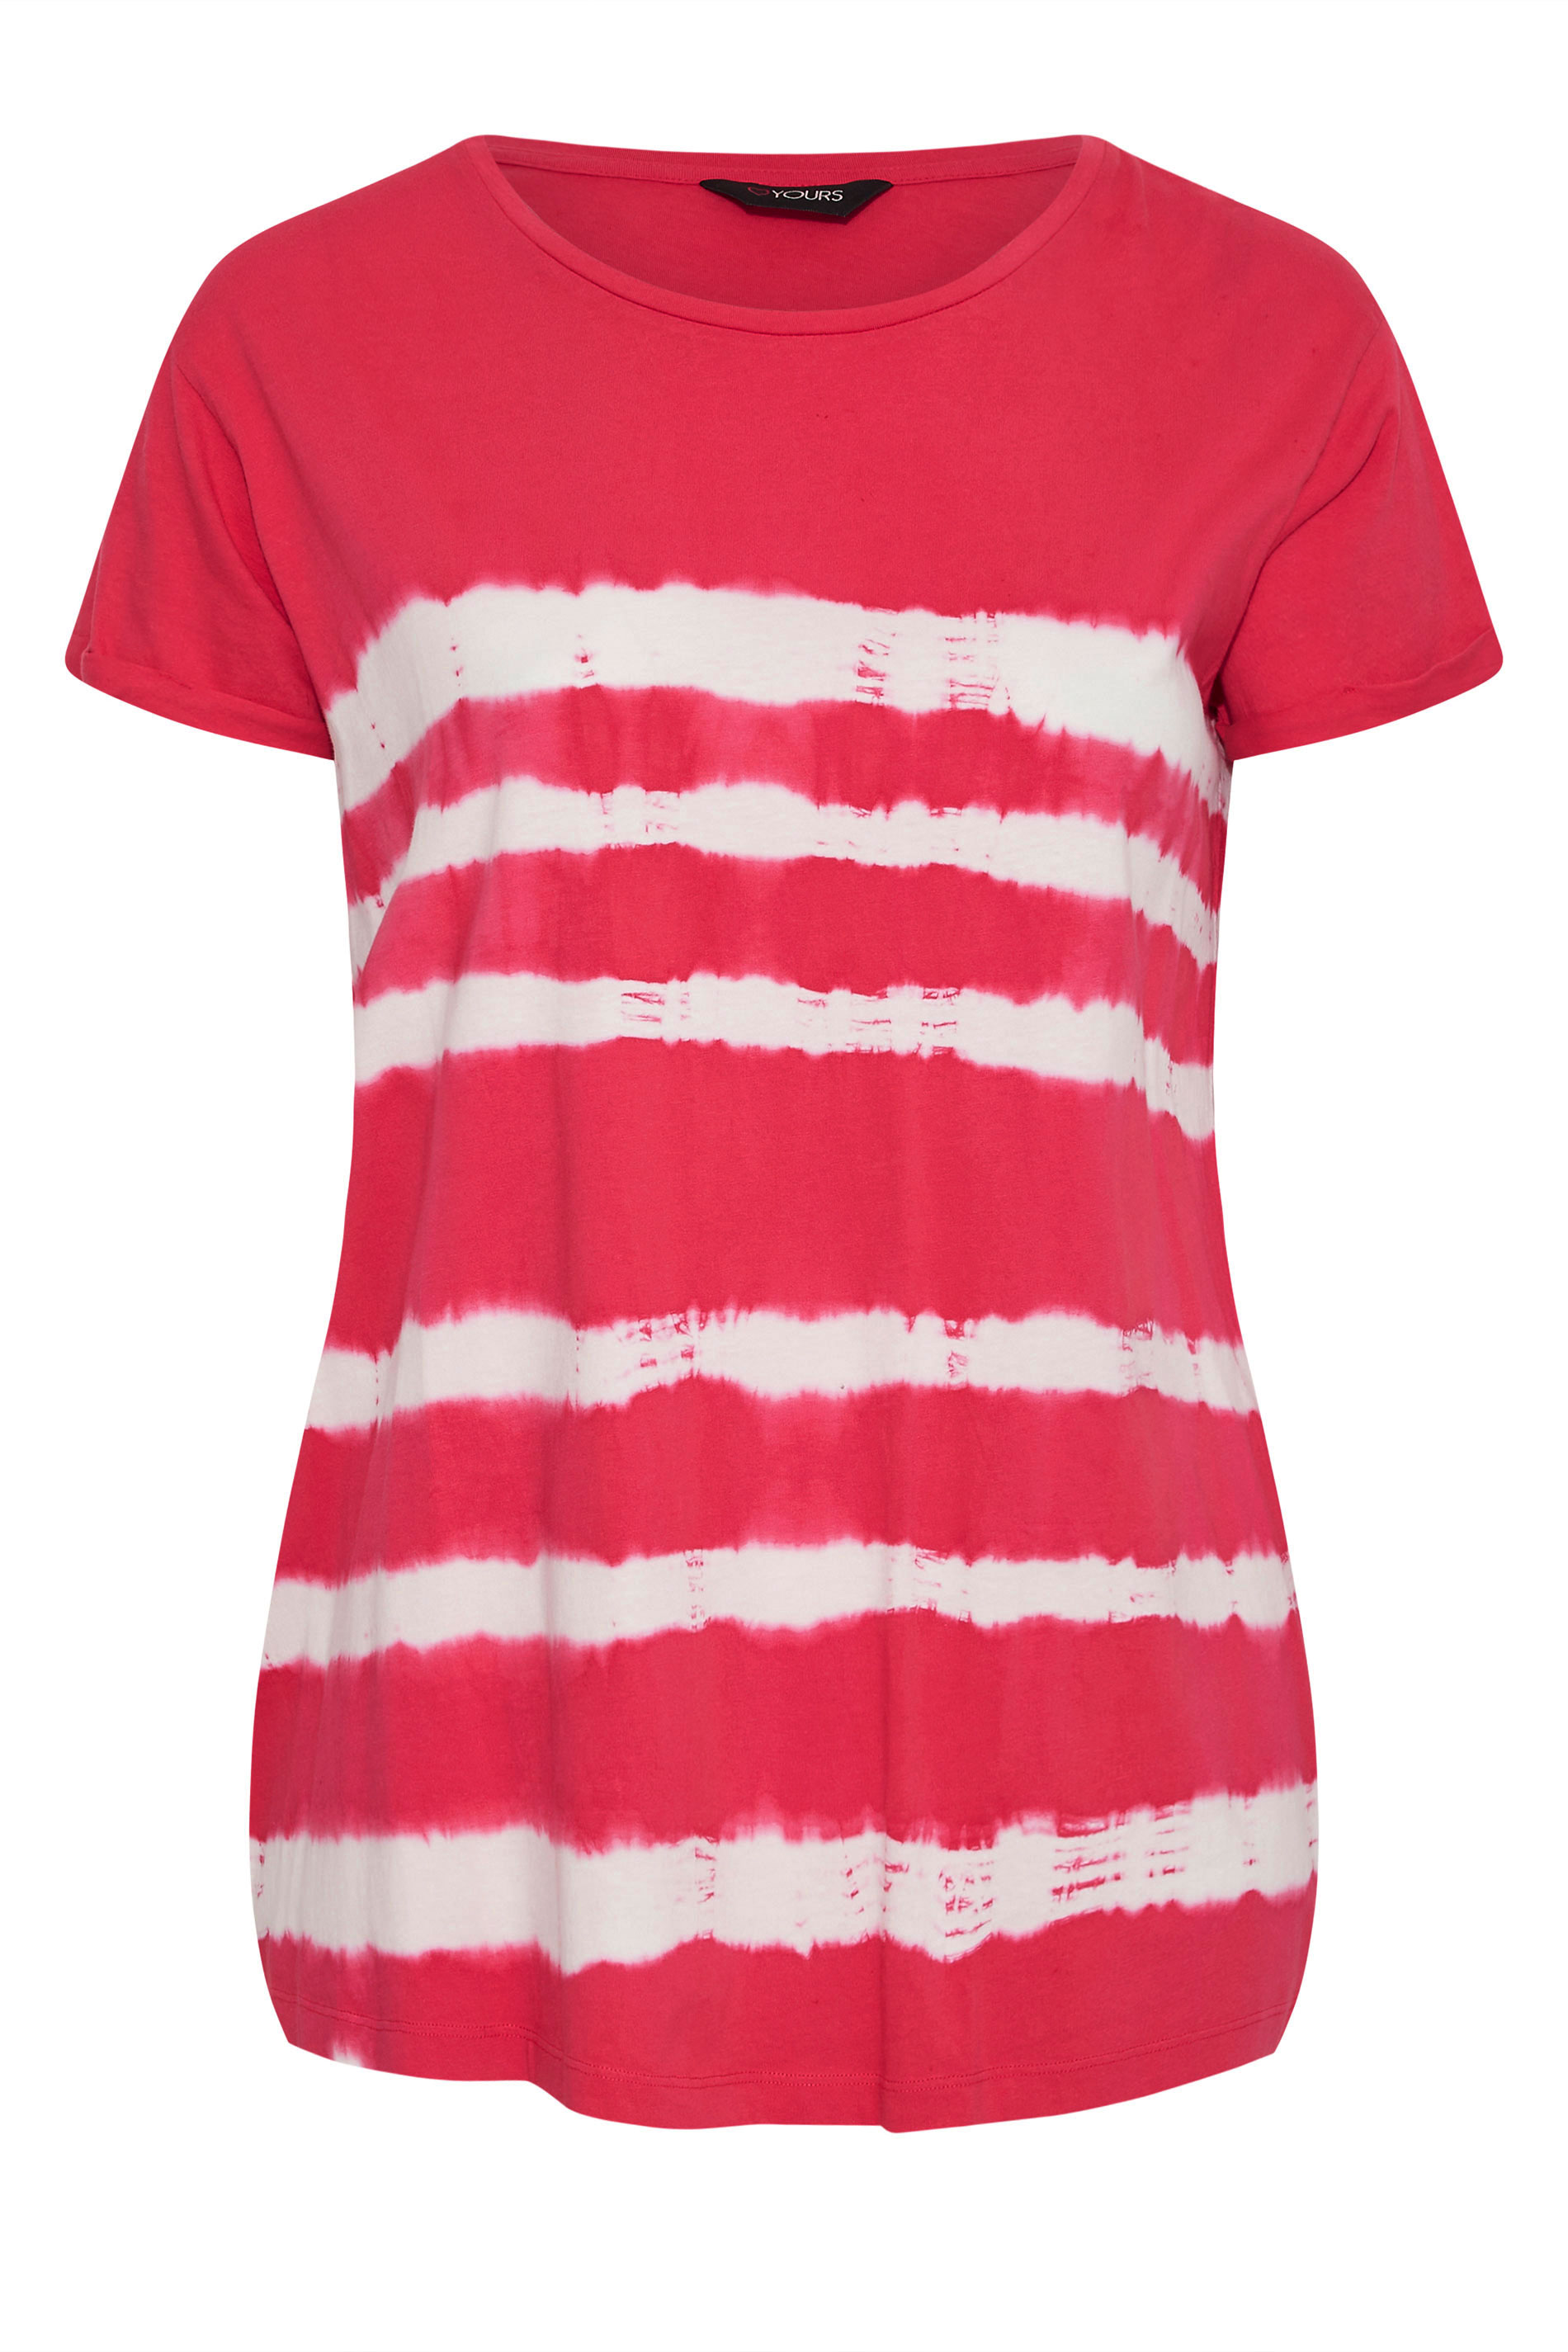 Grande taille  Tops Grande taille  Tops Jersey | YOURS FOR GOOD - T-Shirt Rose Manches Courtes Tie & Dye - OY04627